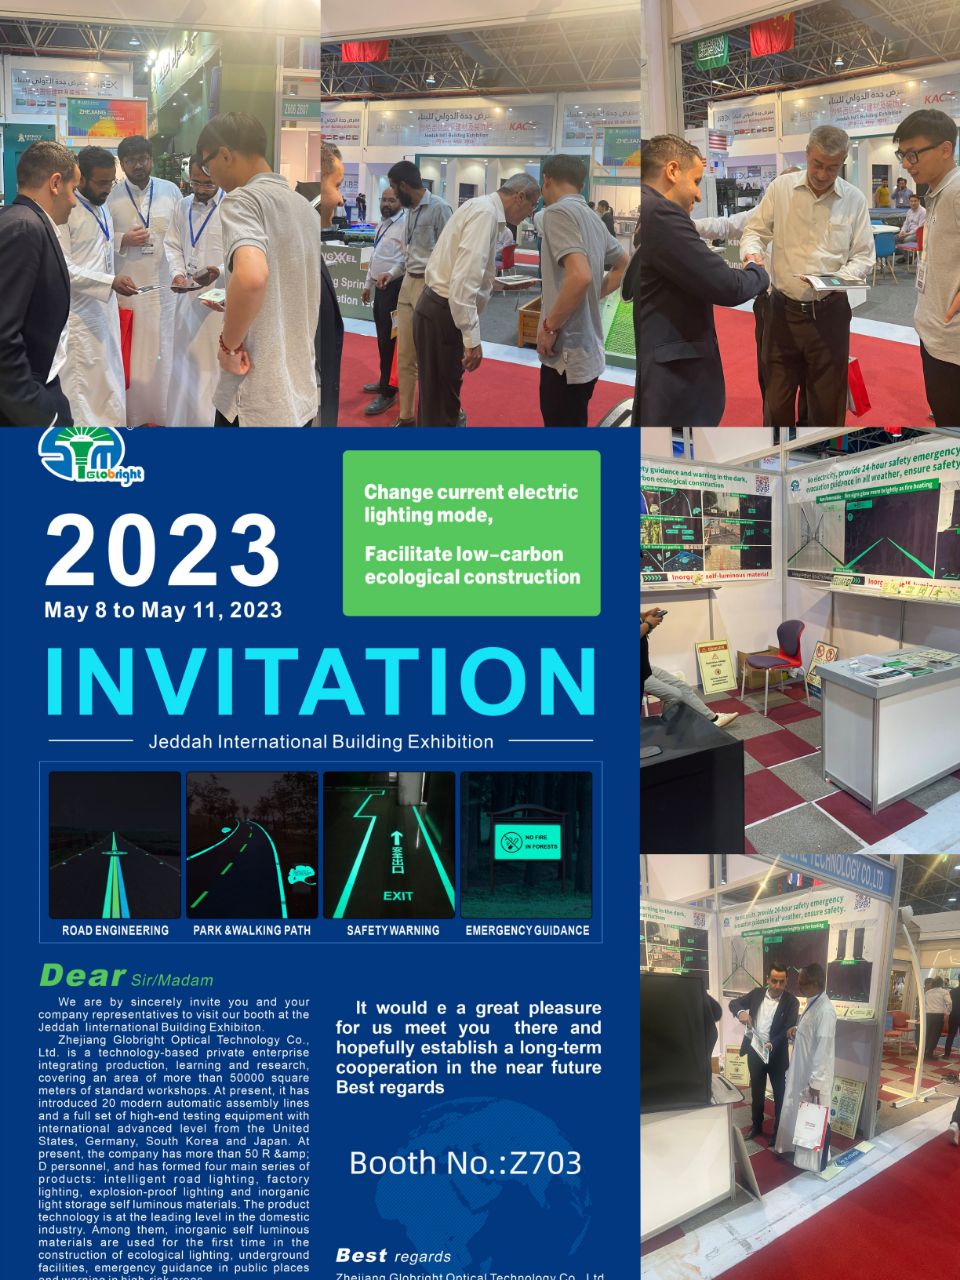 Self luminescent materials were warmly sought after at the Jeddah exhibition.